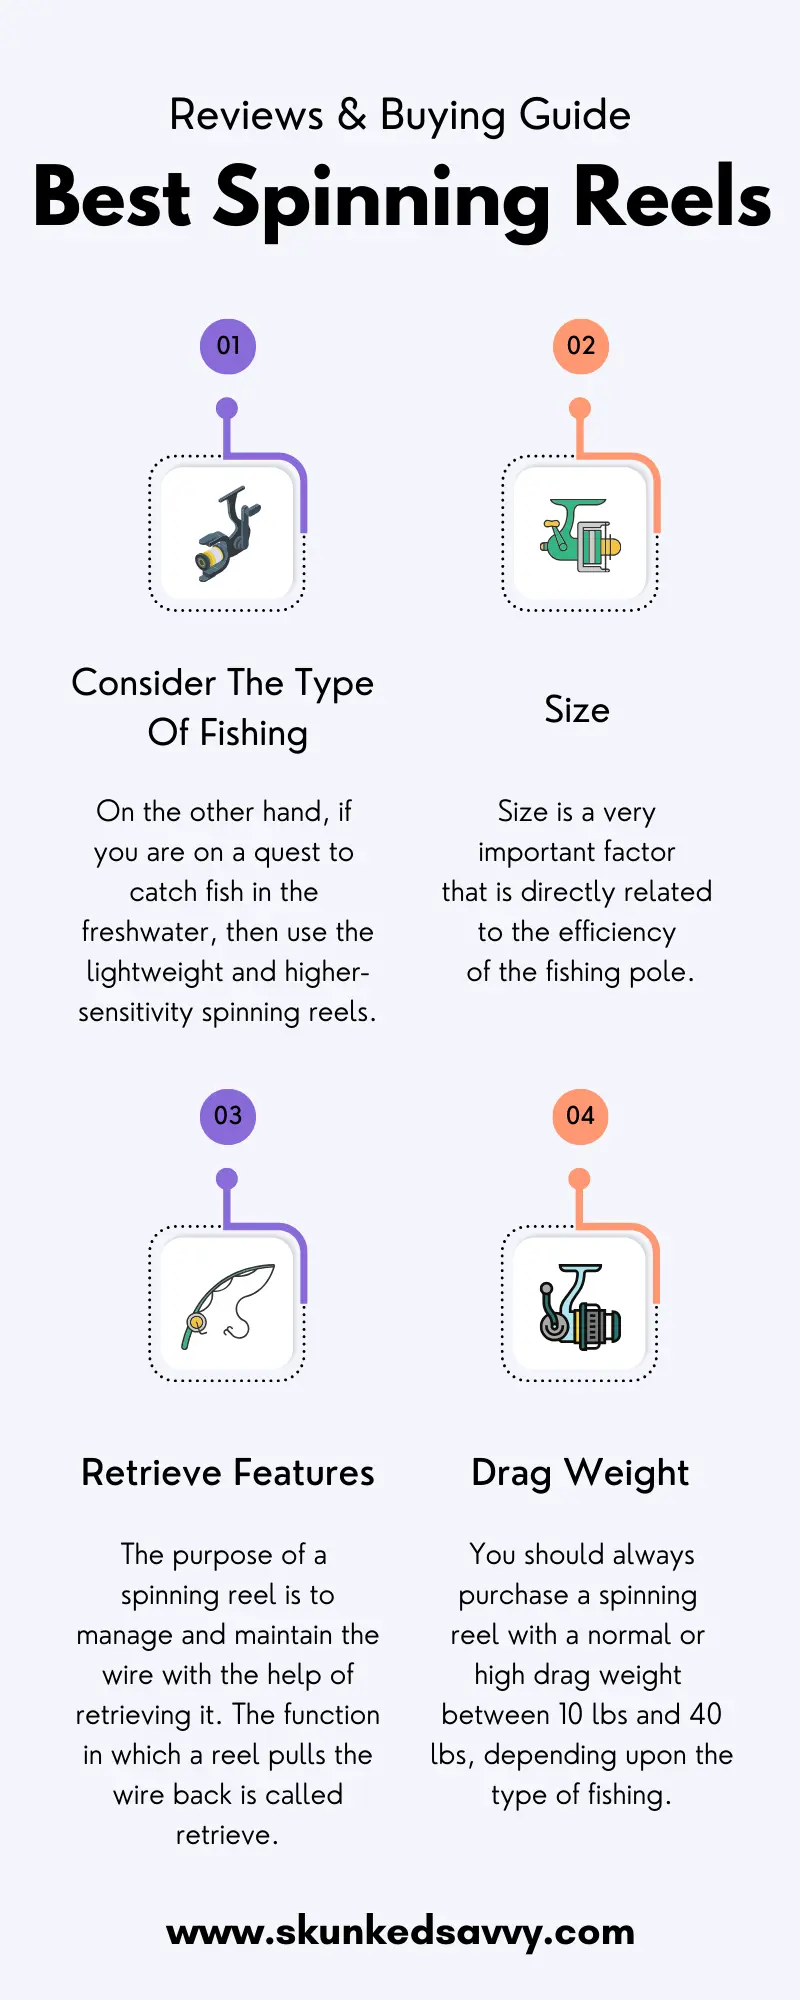 Buying Guide of Best Spinning Reels